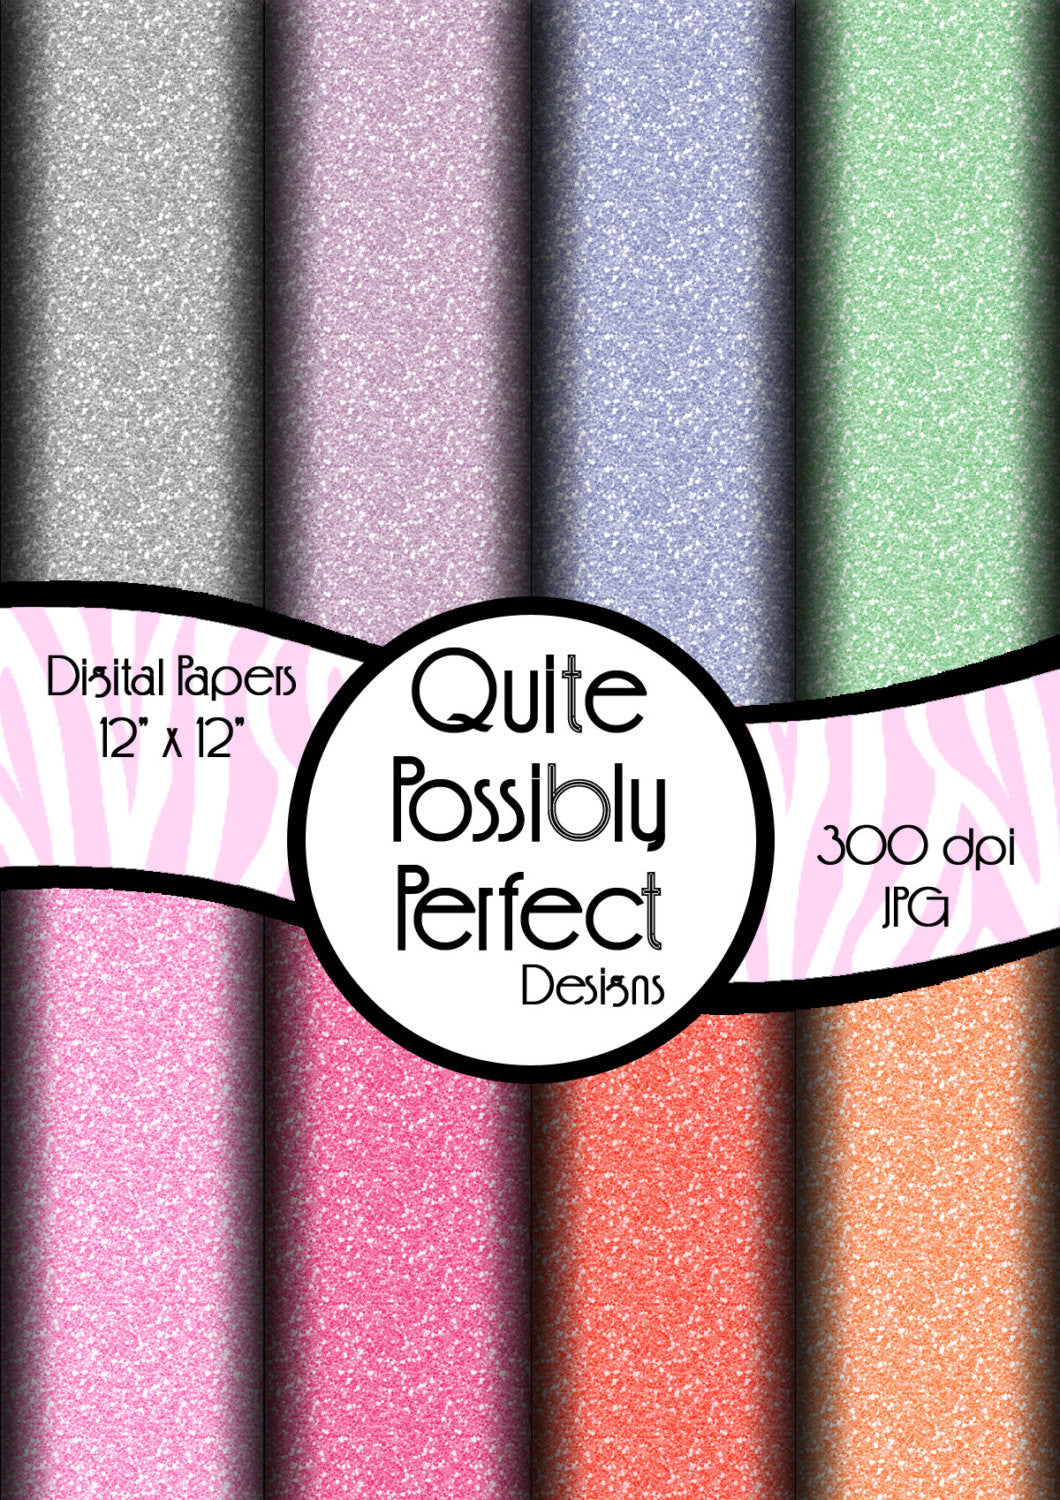 Pastel Fine Glitter Papers Digital Paper Pack Instant Download (DGP101) for Scrapbooking, Collage Sheets,Greeting Cards, Bottle Caps